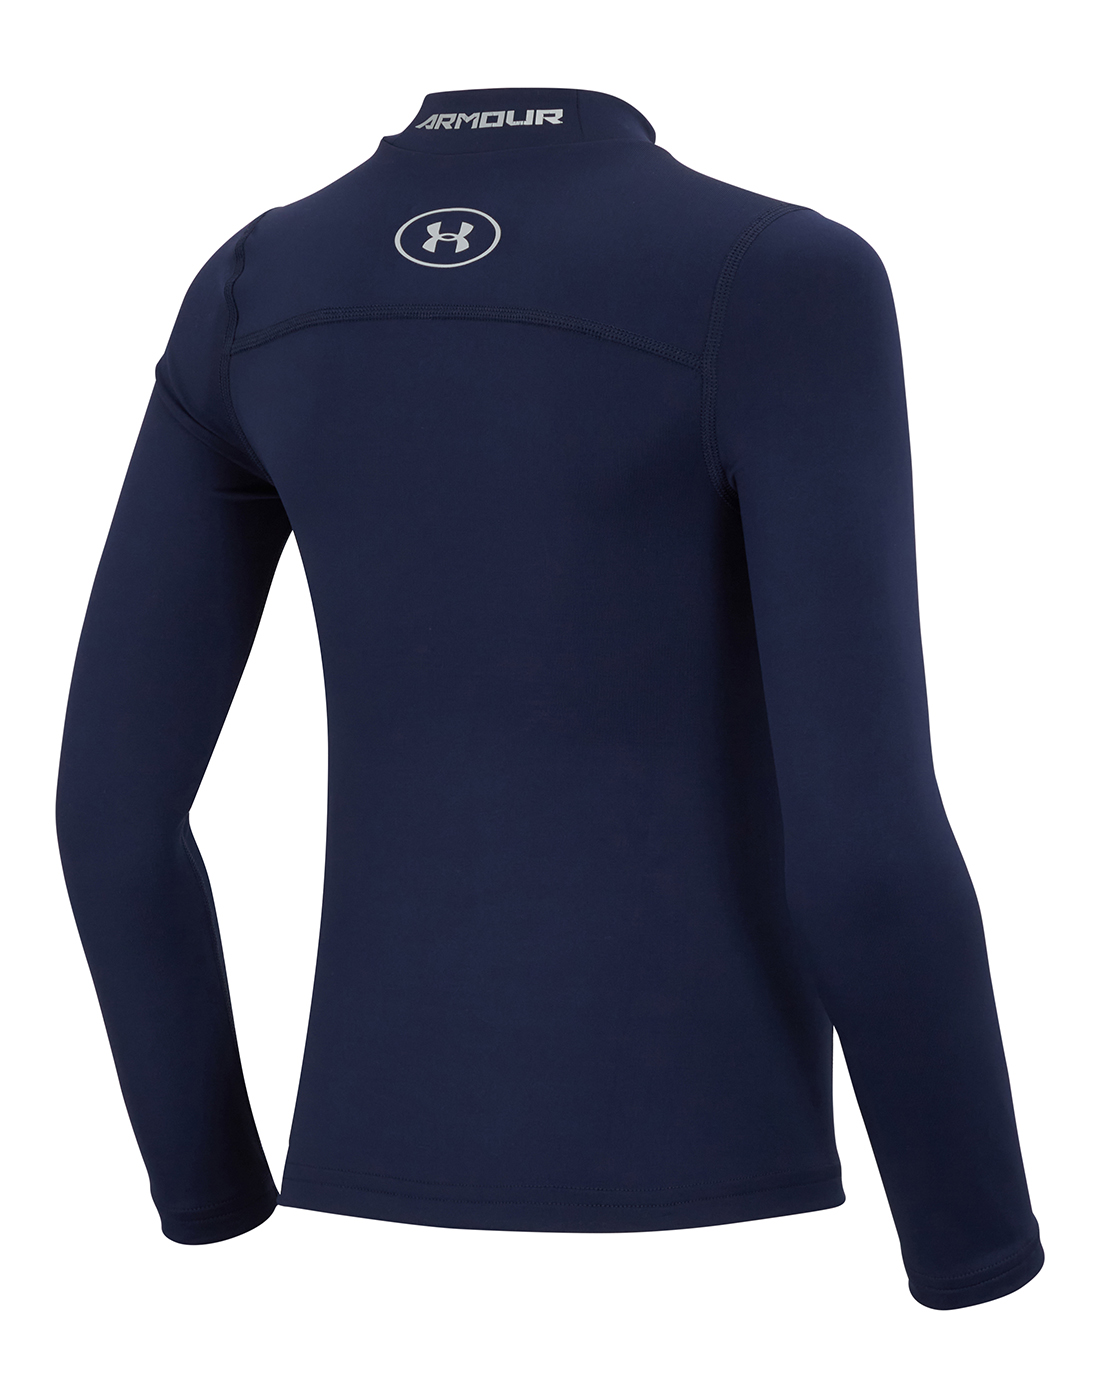 Under Armour Kids Cold Gear Armour Mock Neck Top - Navy